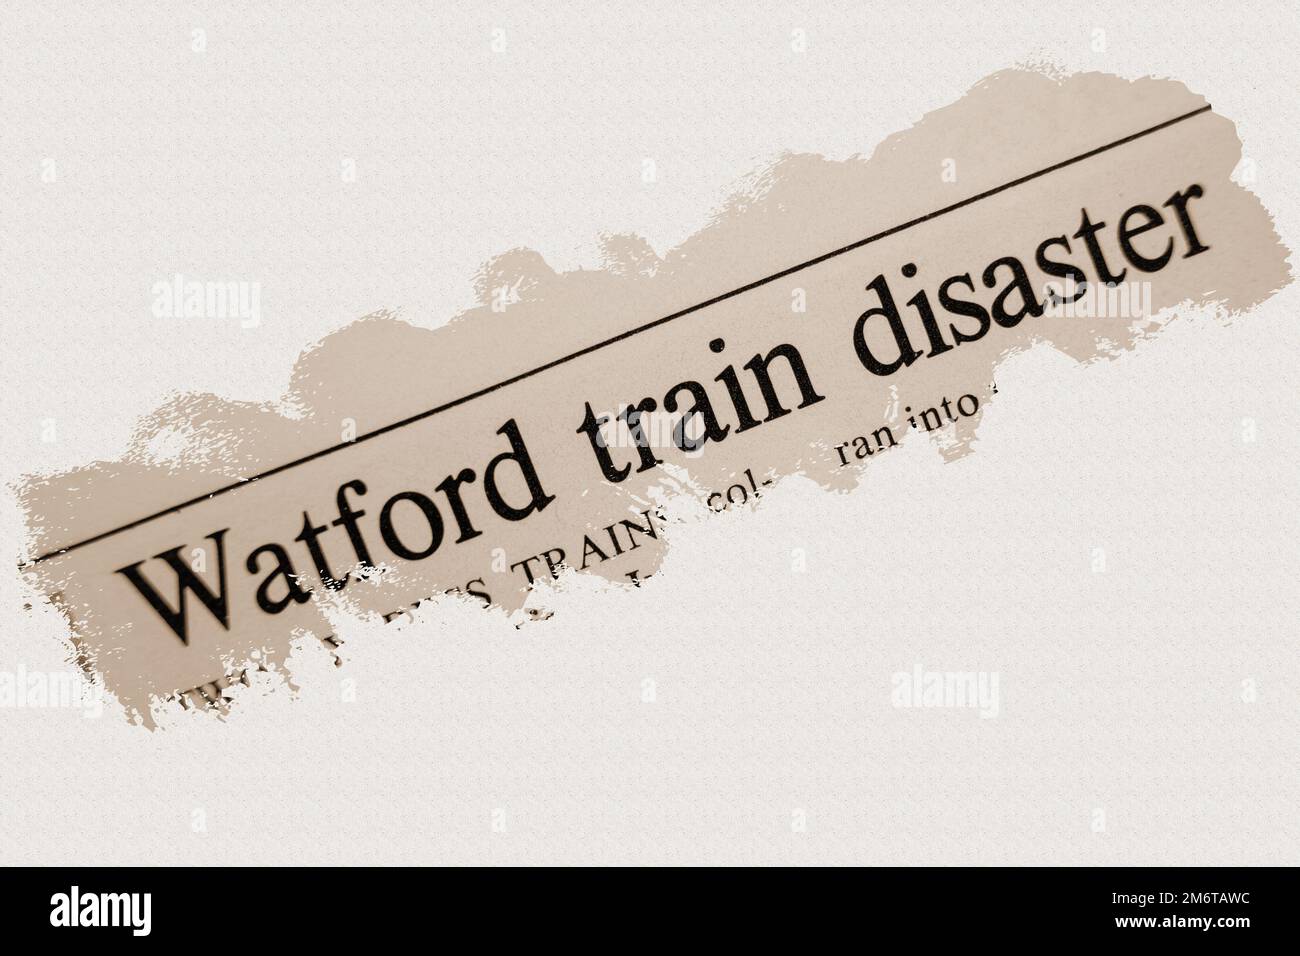 news story from 1975 newspaper headline article title - Watford train disaster - sepia Stock Photo